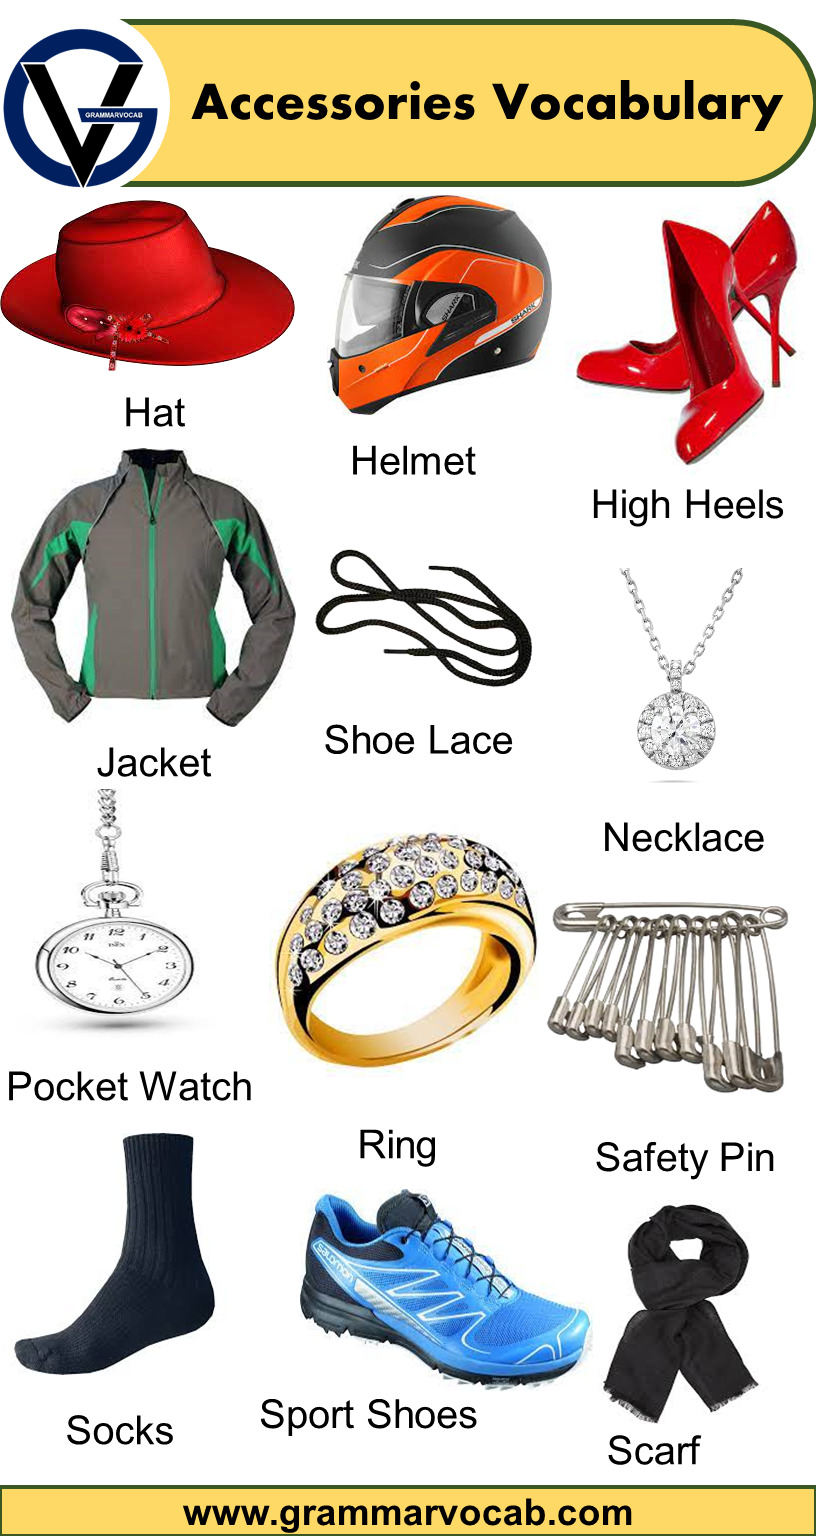 Accessories Vocabulary with Pictures